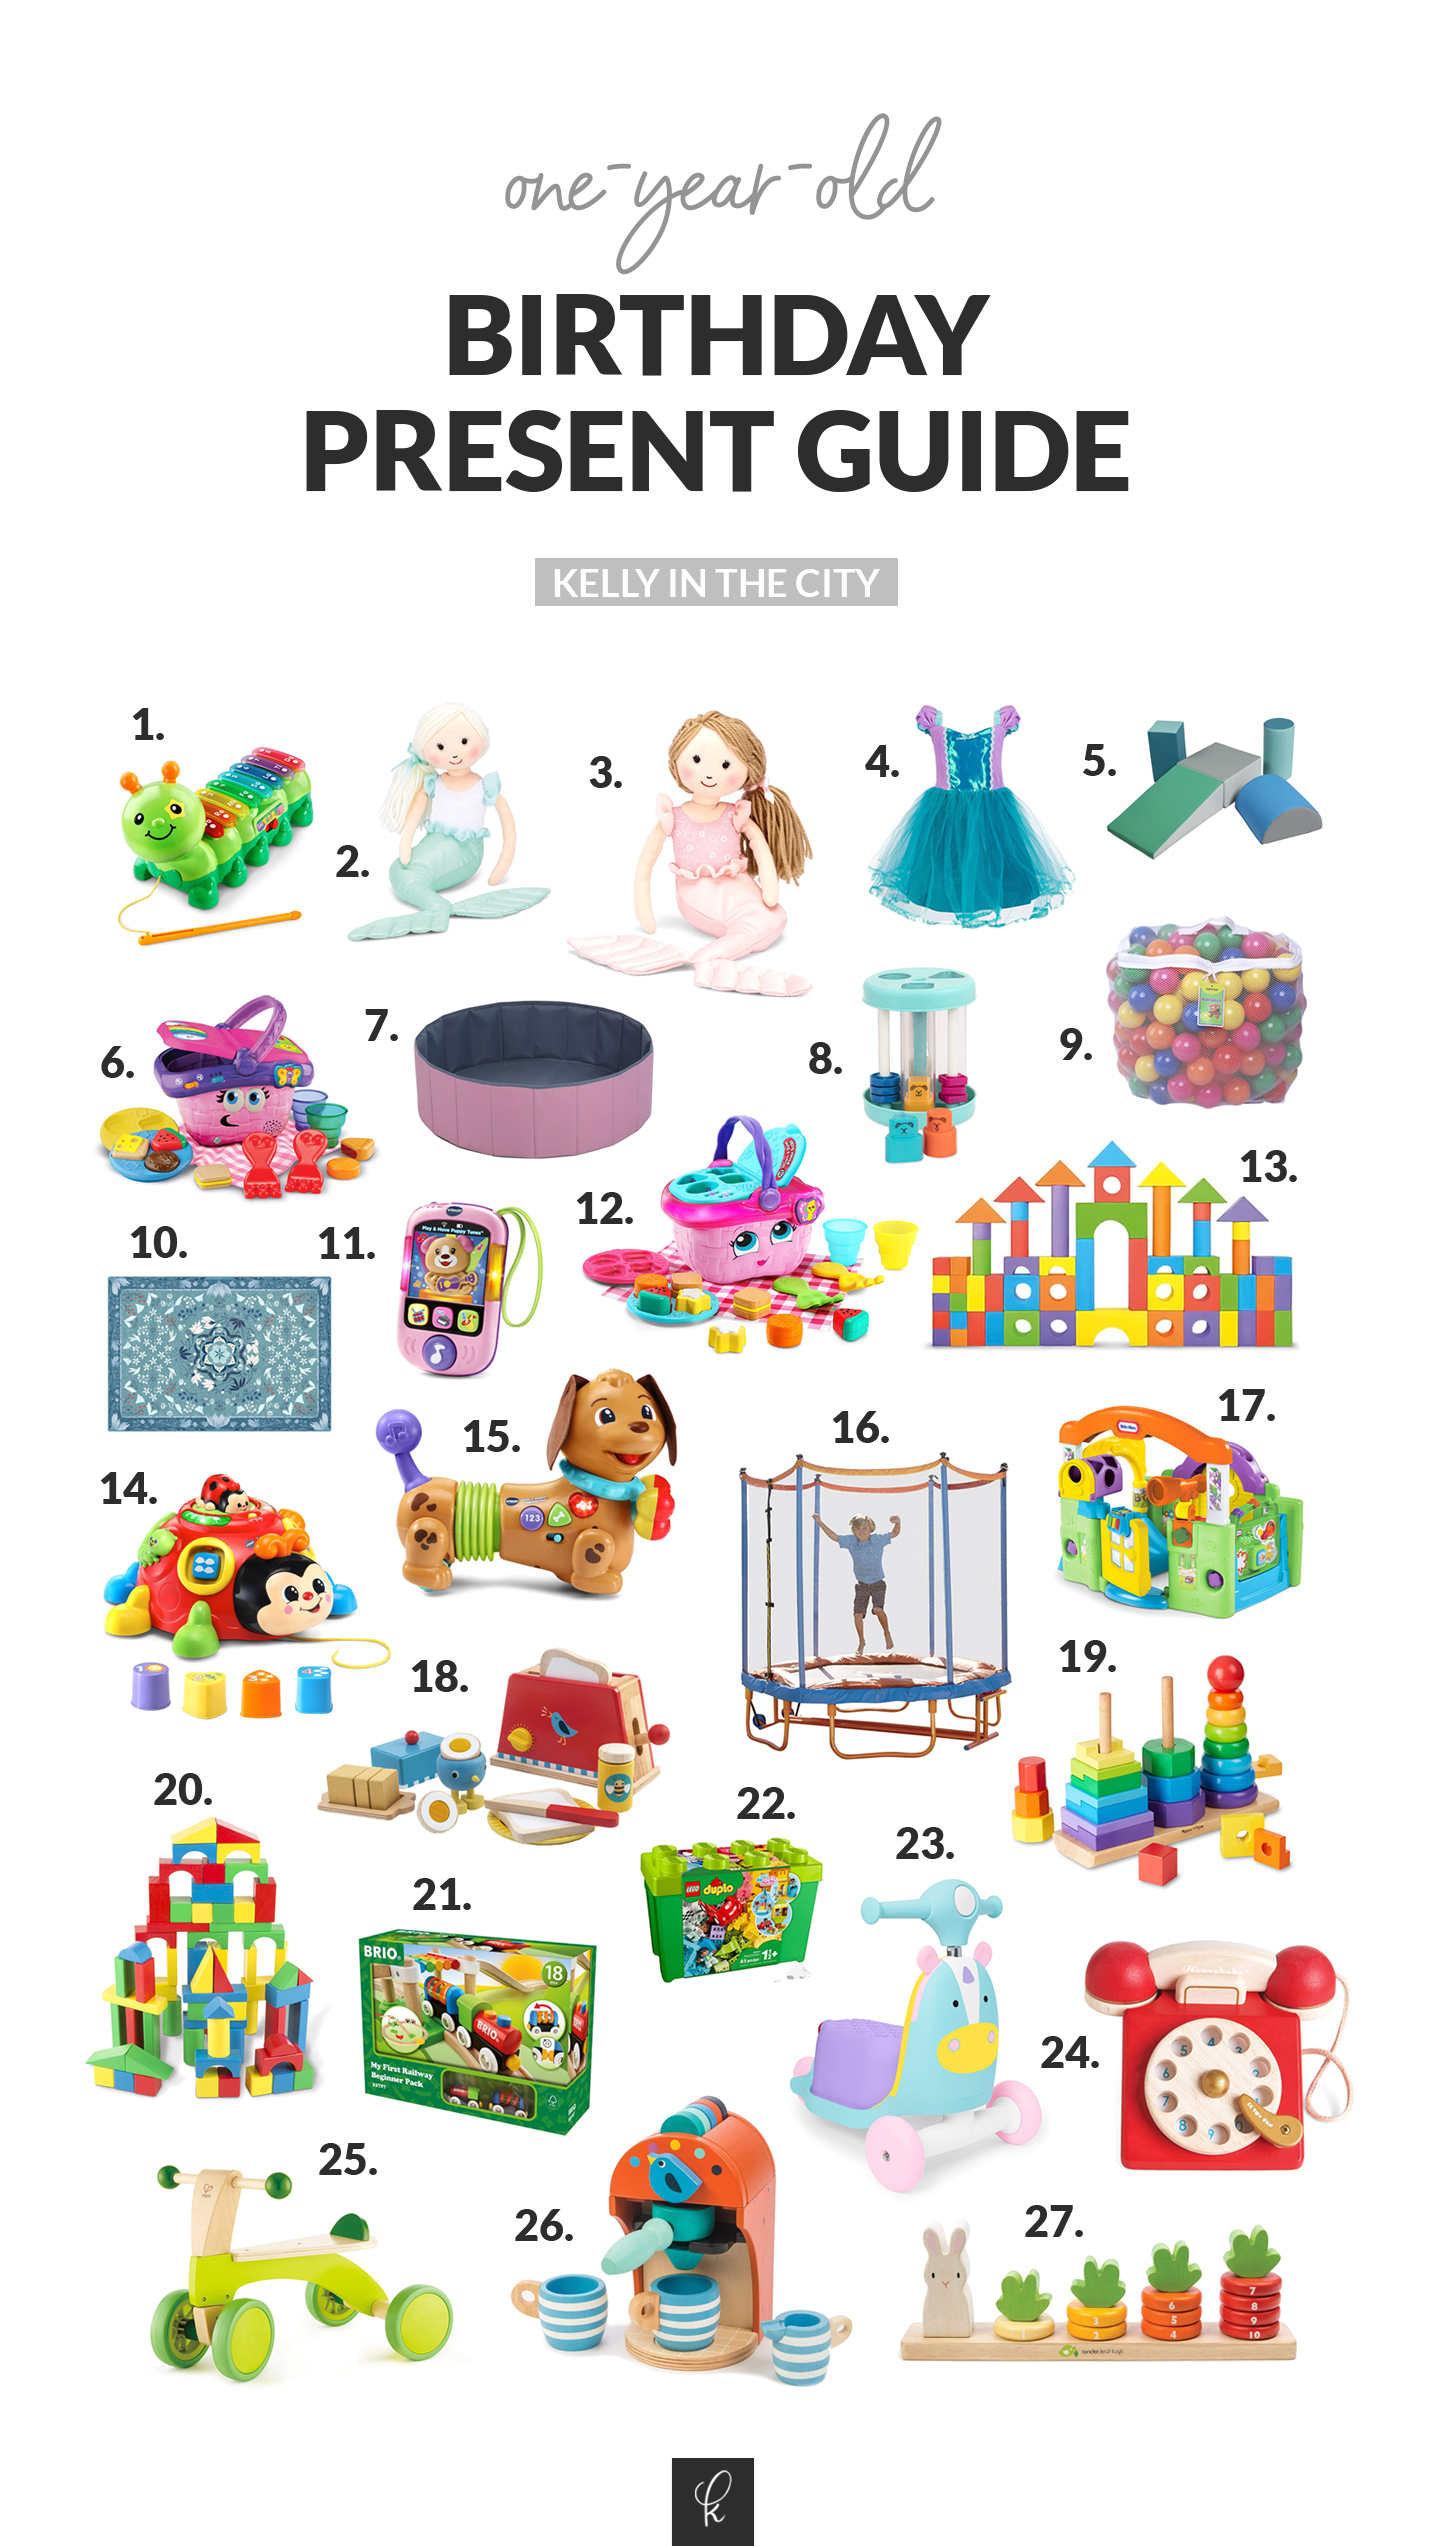 Gifts for One-Year-Olds - Kelly in the City